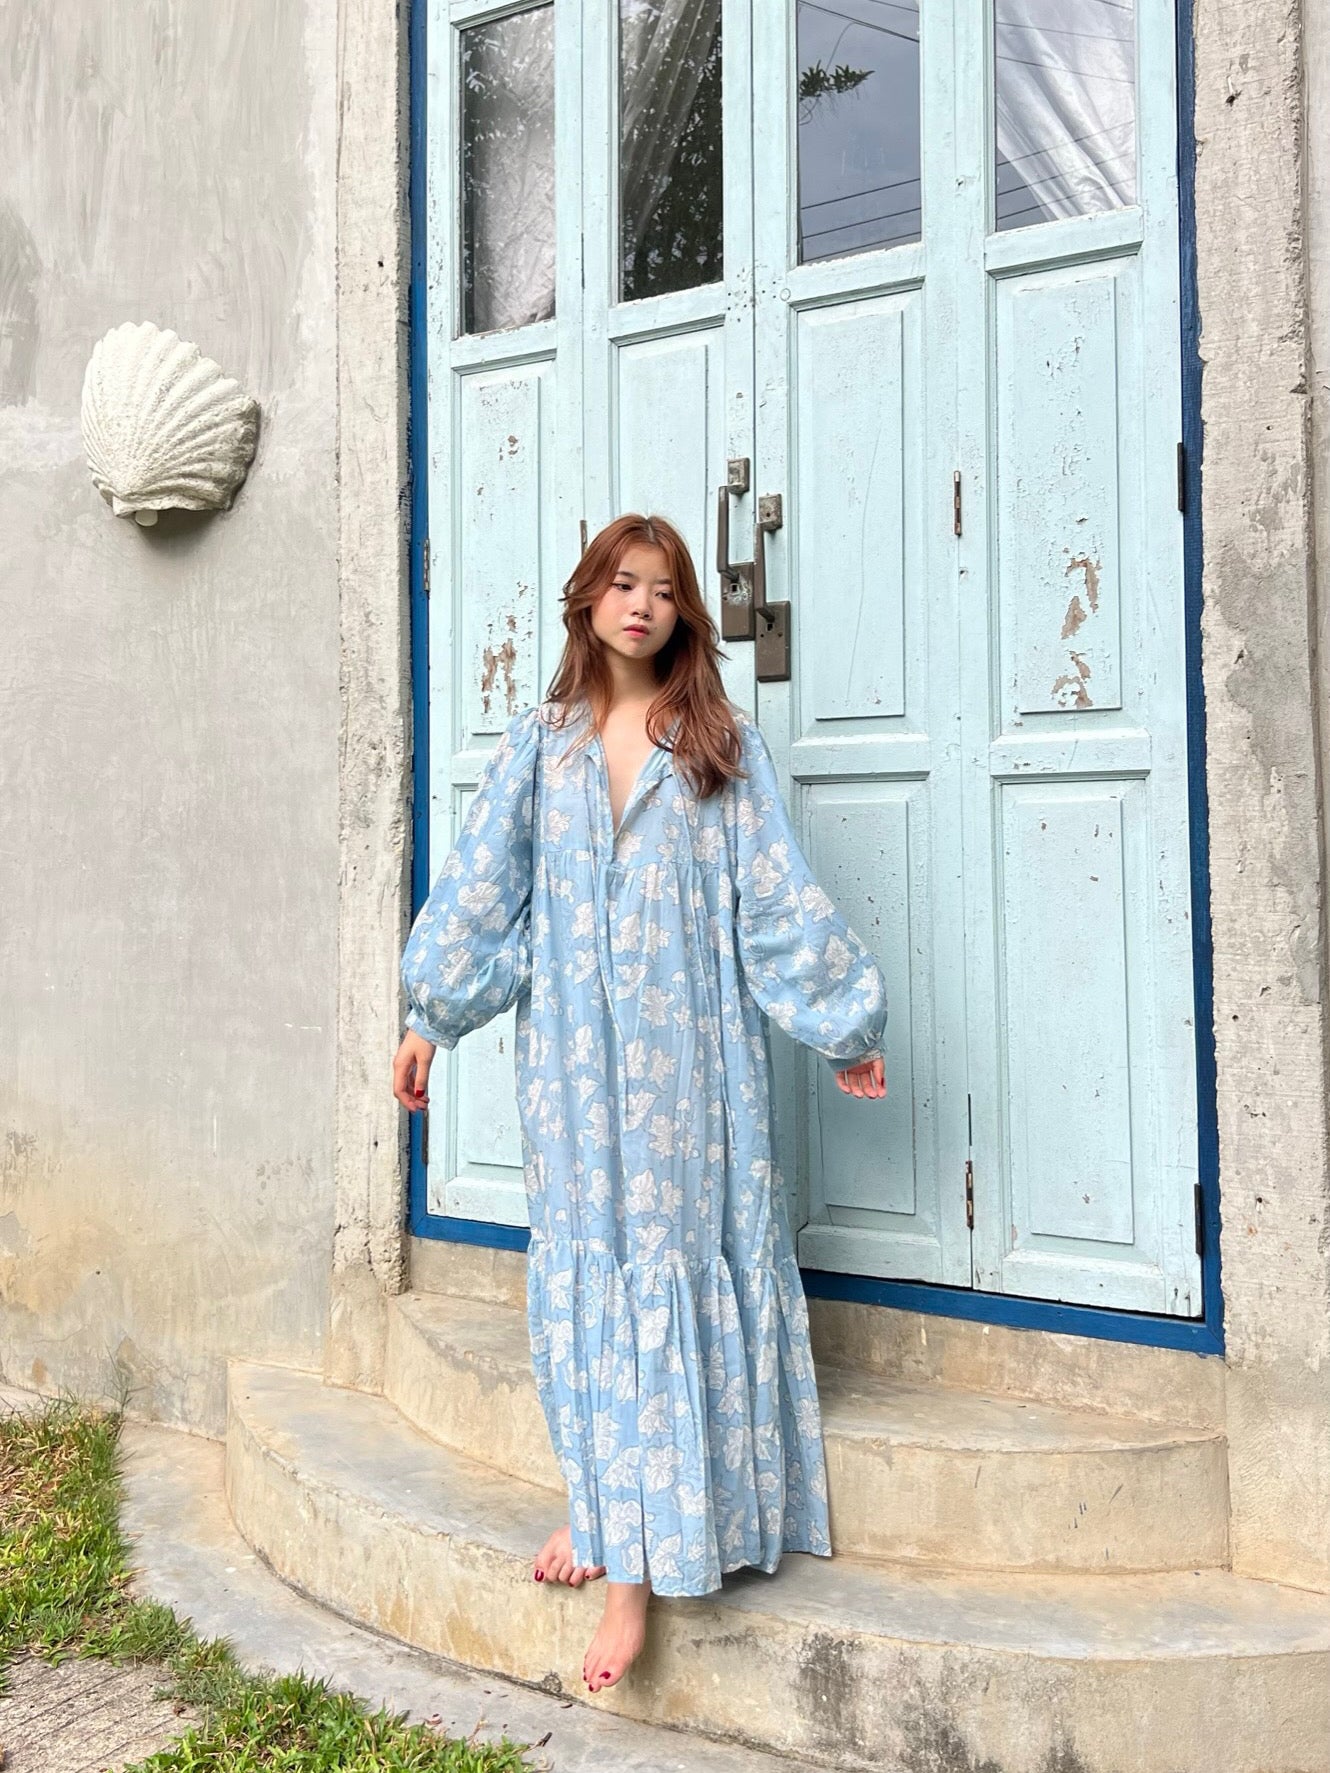 Shop Coco de Chom - new Introducing our Lola Bohemian Maxi Dress in Blue Limited Edition - an exceptionally unique piece available in limited quantities. The Lola's captivating design is handcrafted using wooden blocks meticulously placed on the finest cotton voile, resulting in a dreamy block printed pattern that draws inspiration from the bougainvillea flower and the vacation vibe. Wear it as a maxi dress for beach Boho vibes, style it as a bohemian outfit for festivals, or use it as a chic beach dress.